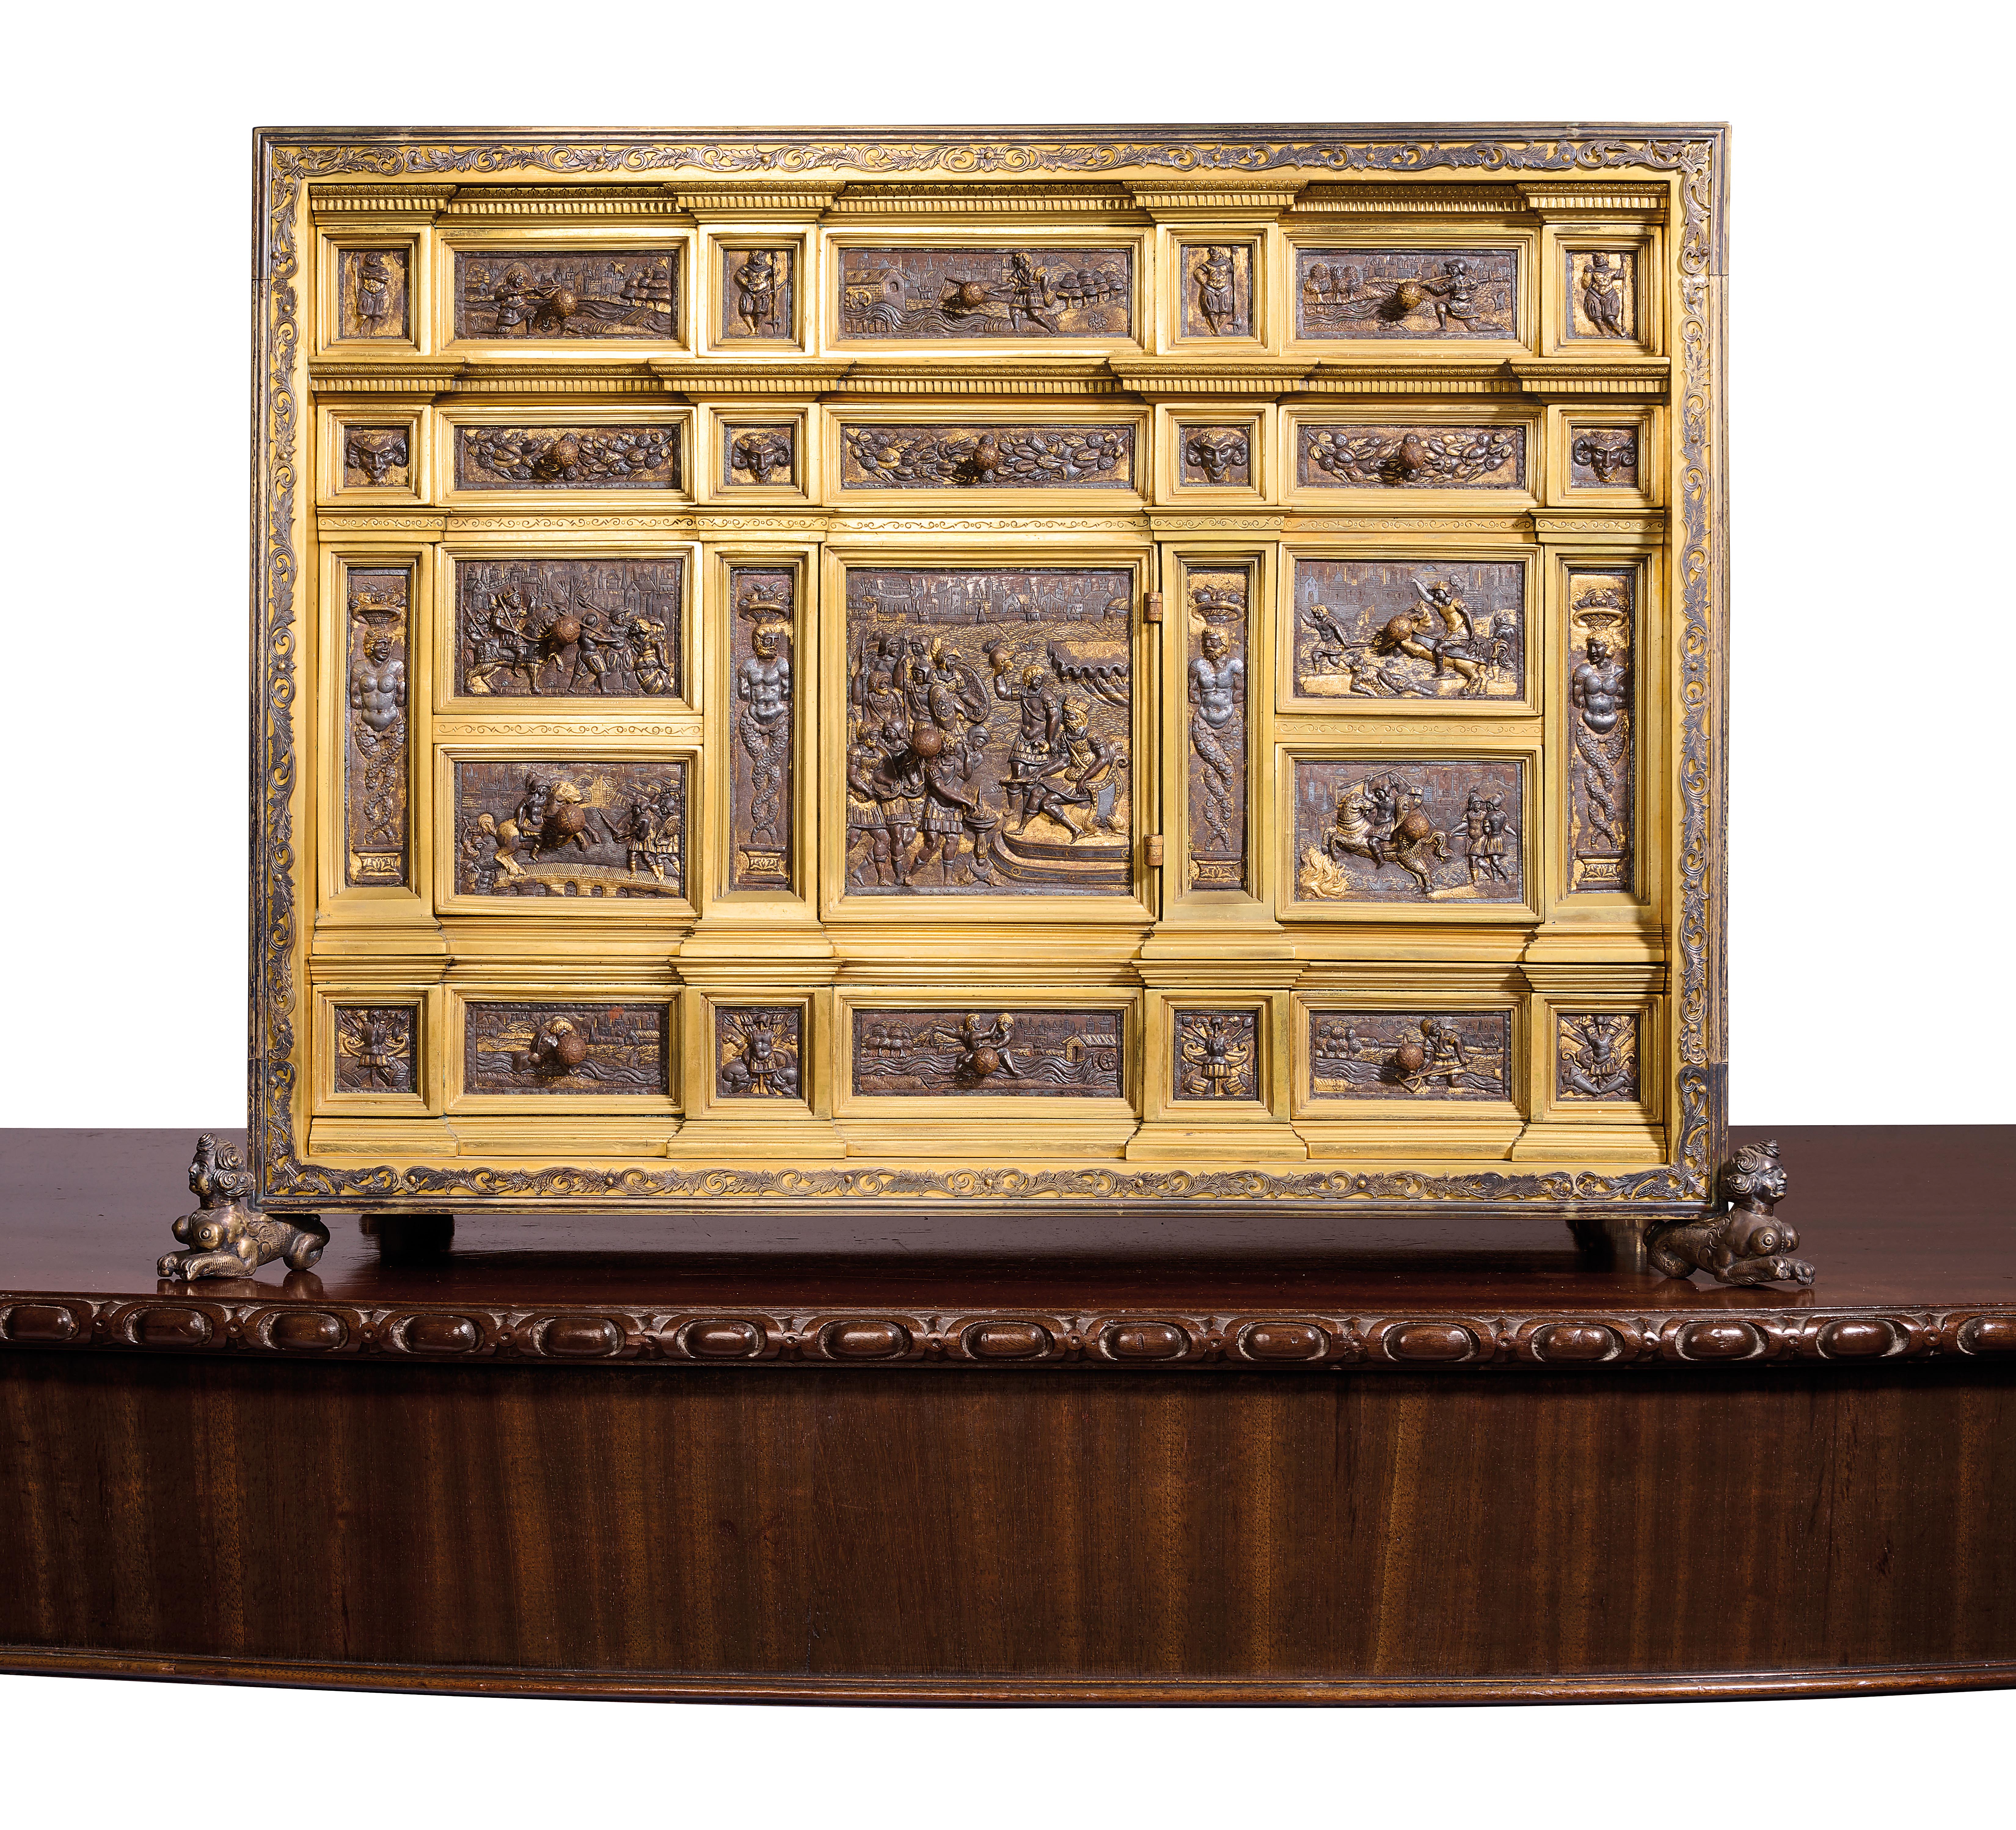 'THE ROTHSCHILD MILANESE ARMOURER'S CABINET' A RARE NORTH ITALIAN DAMASCENED STEEL AND GILT BRONZE